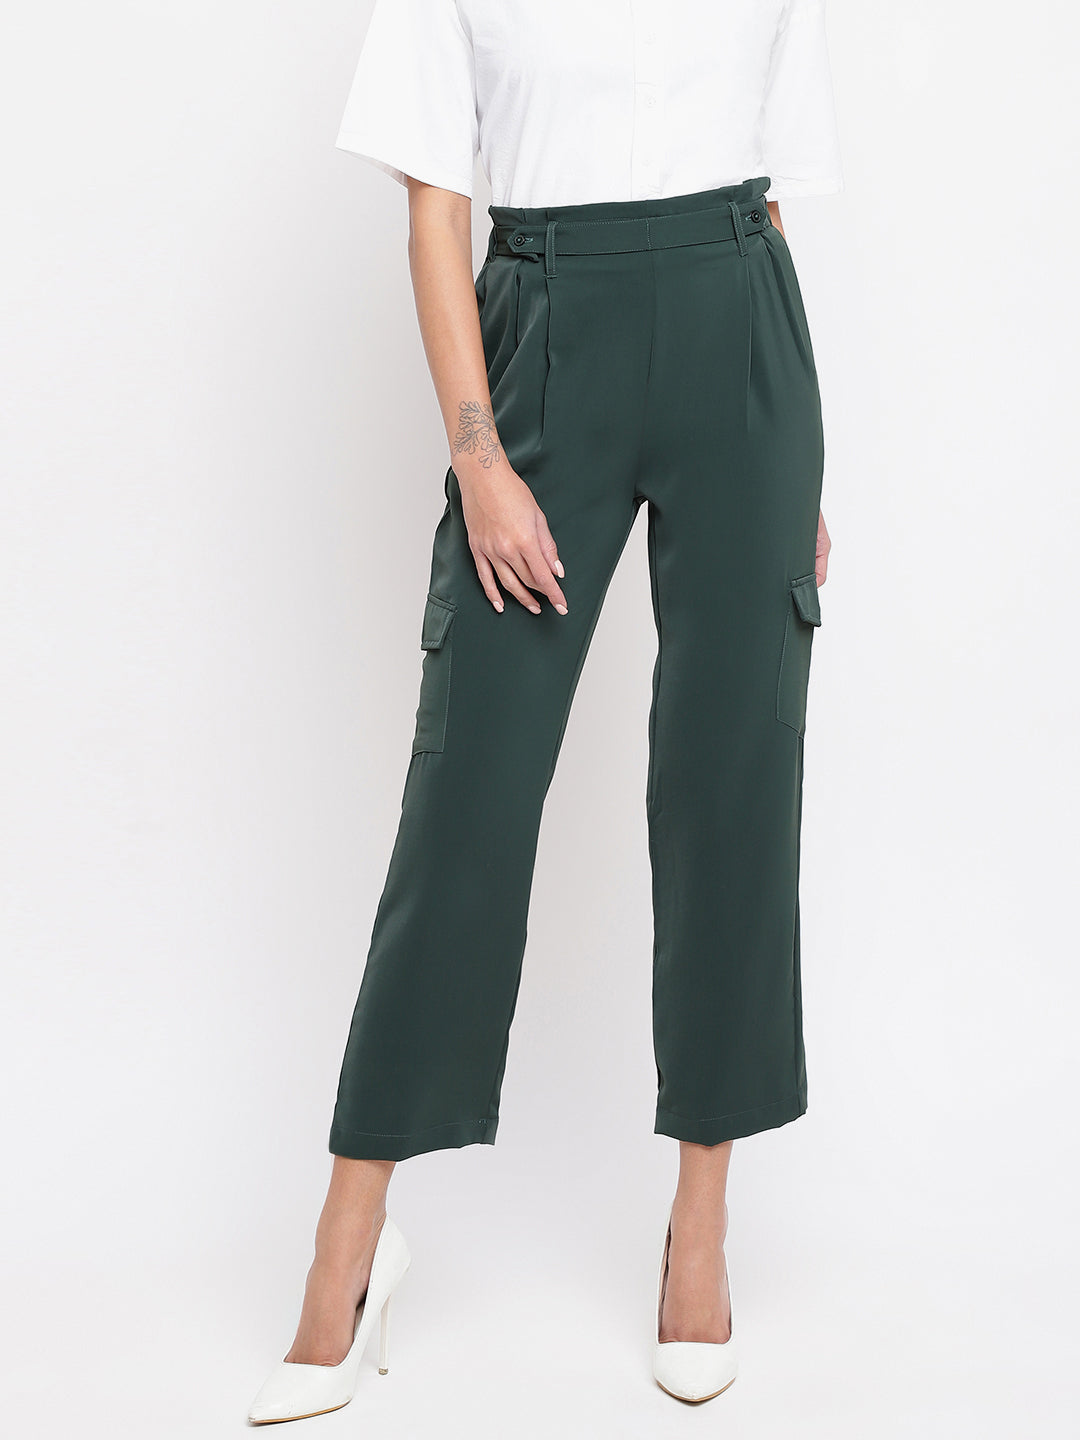 Greenbottle Straight Pant